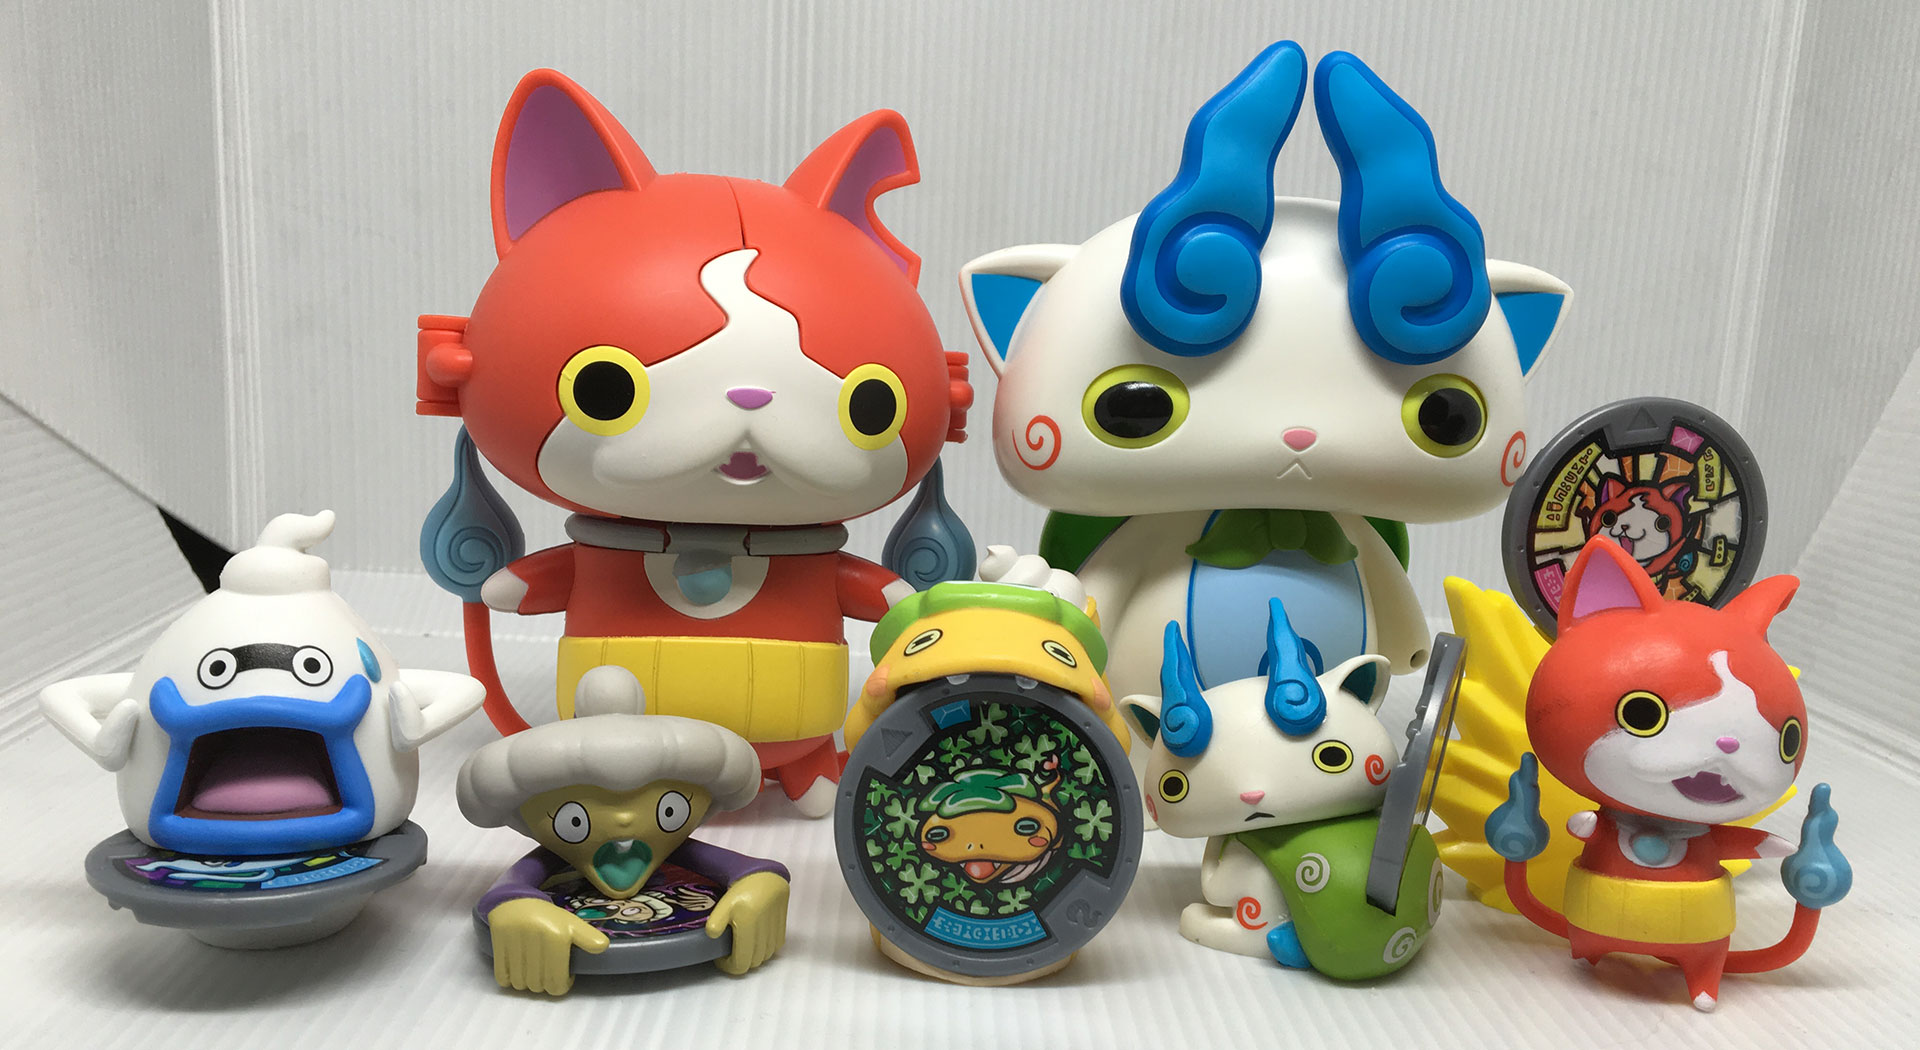 Forget The Apple Watch, The Yo-Kai Watch Toys Are Here